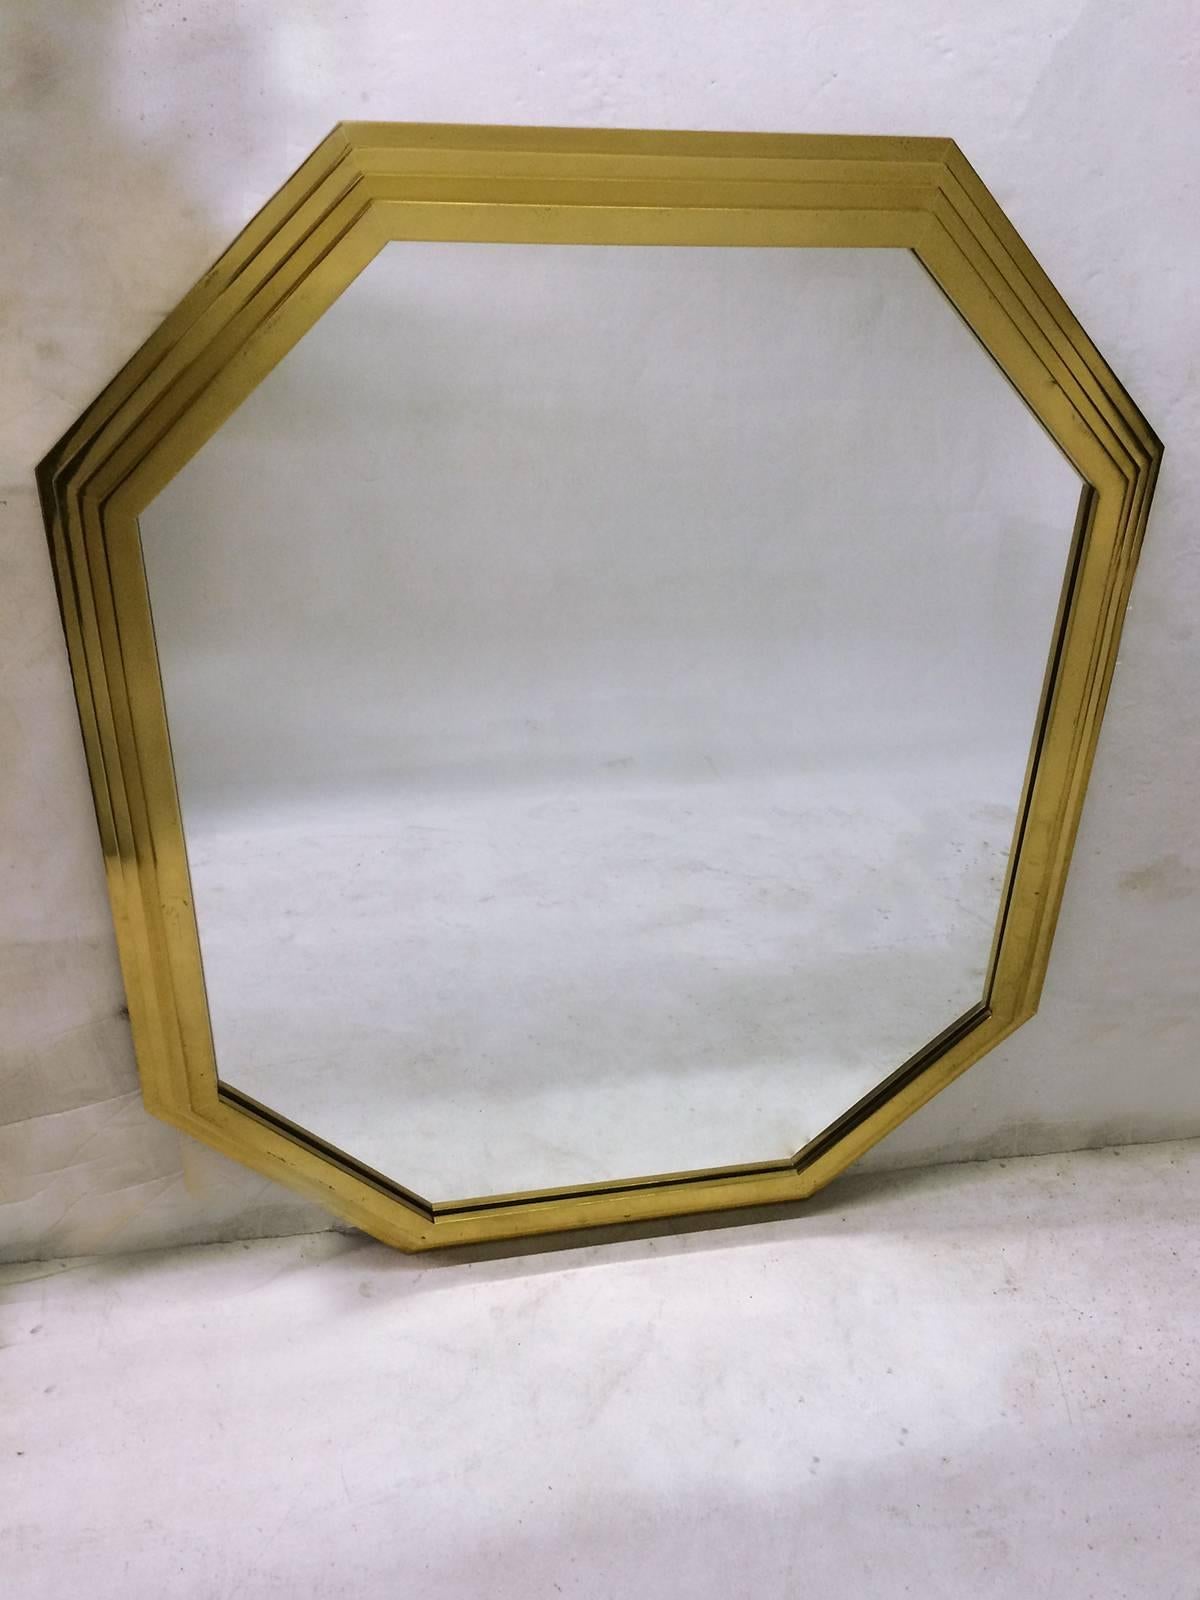 This octagonally-shaped mirror is framed in a stepped brass frame with four levels. Reflections and shadows on stepped frame create a very modern architectural feel. Mirror has sticker stating 